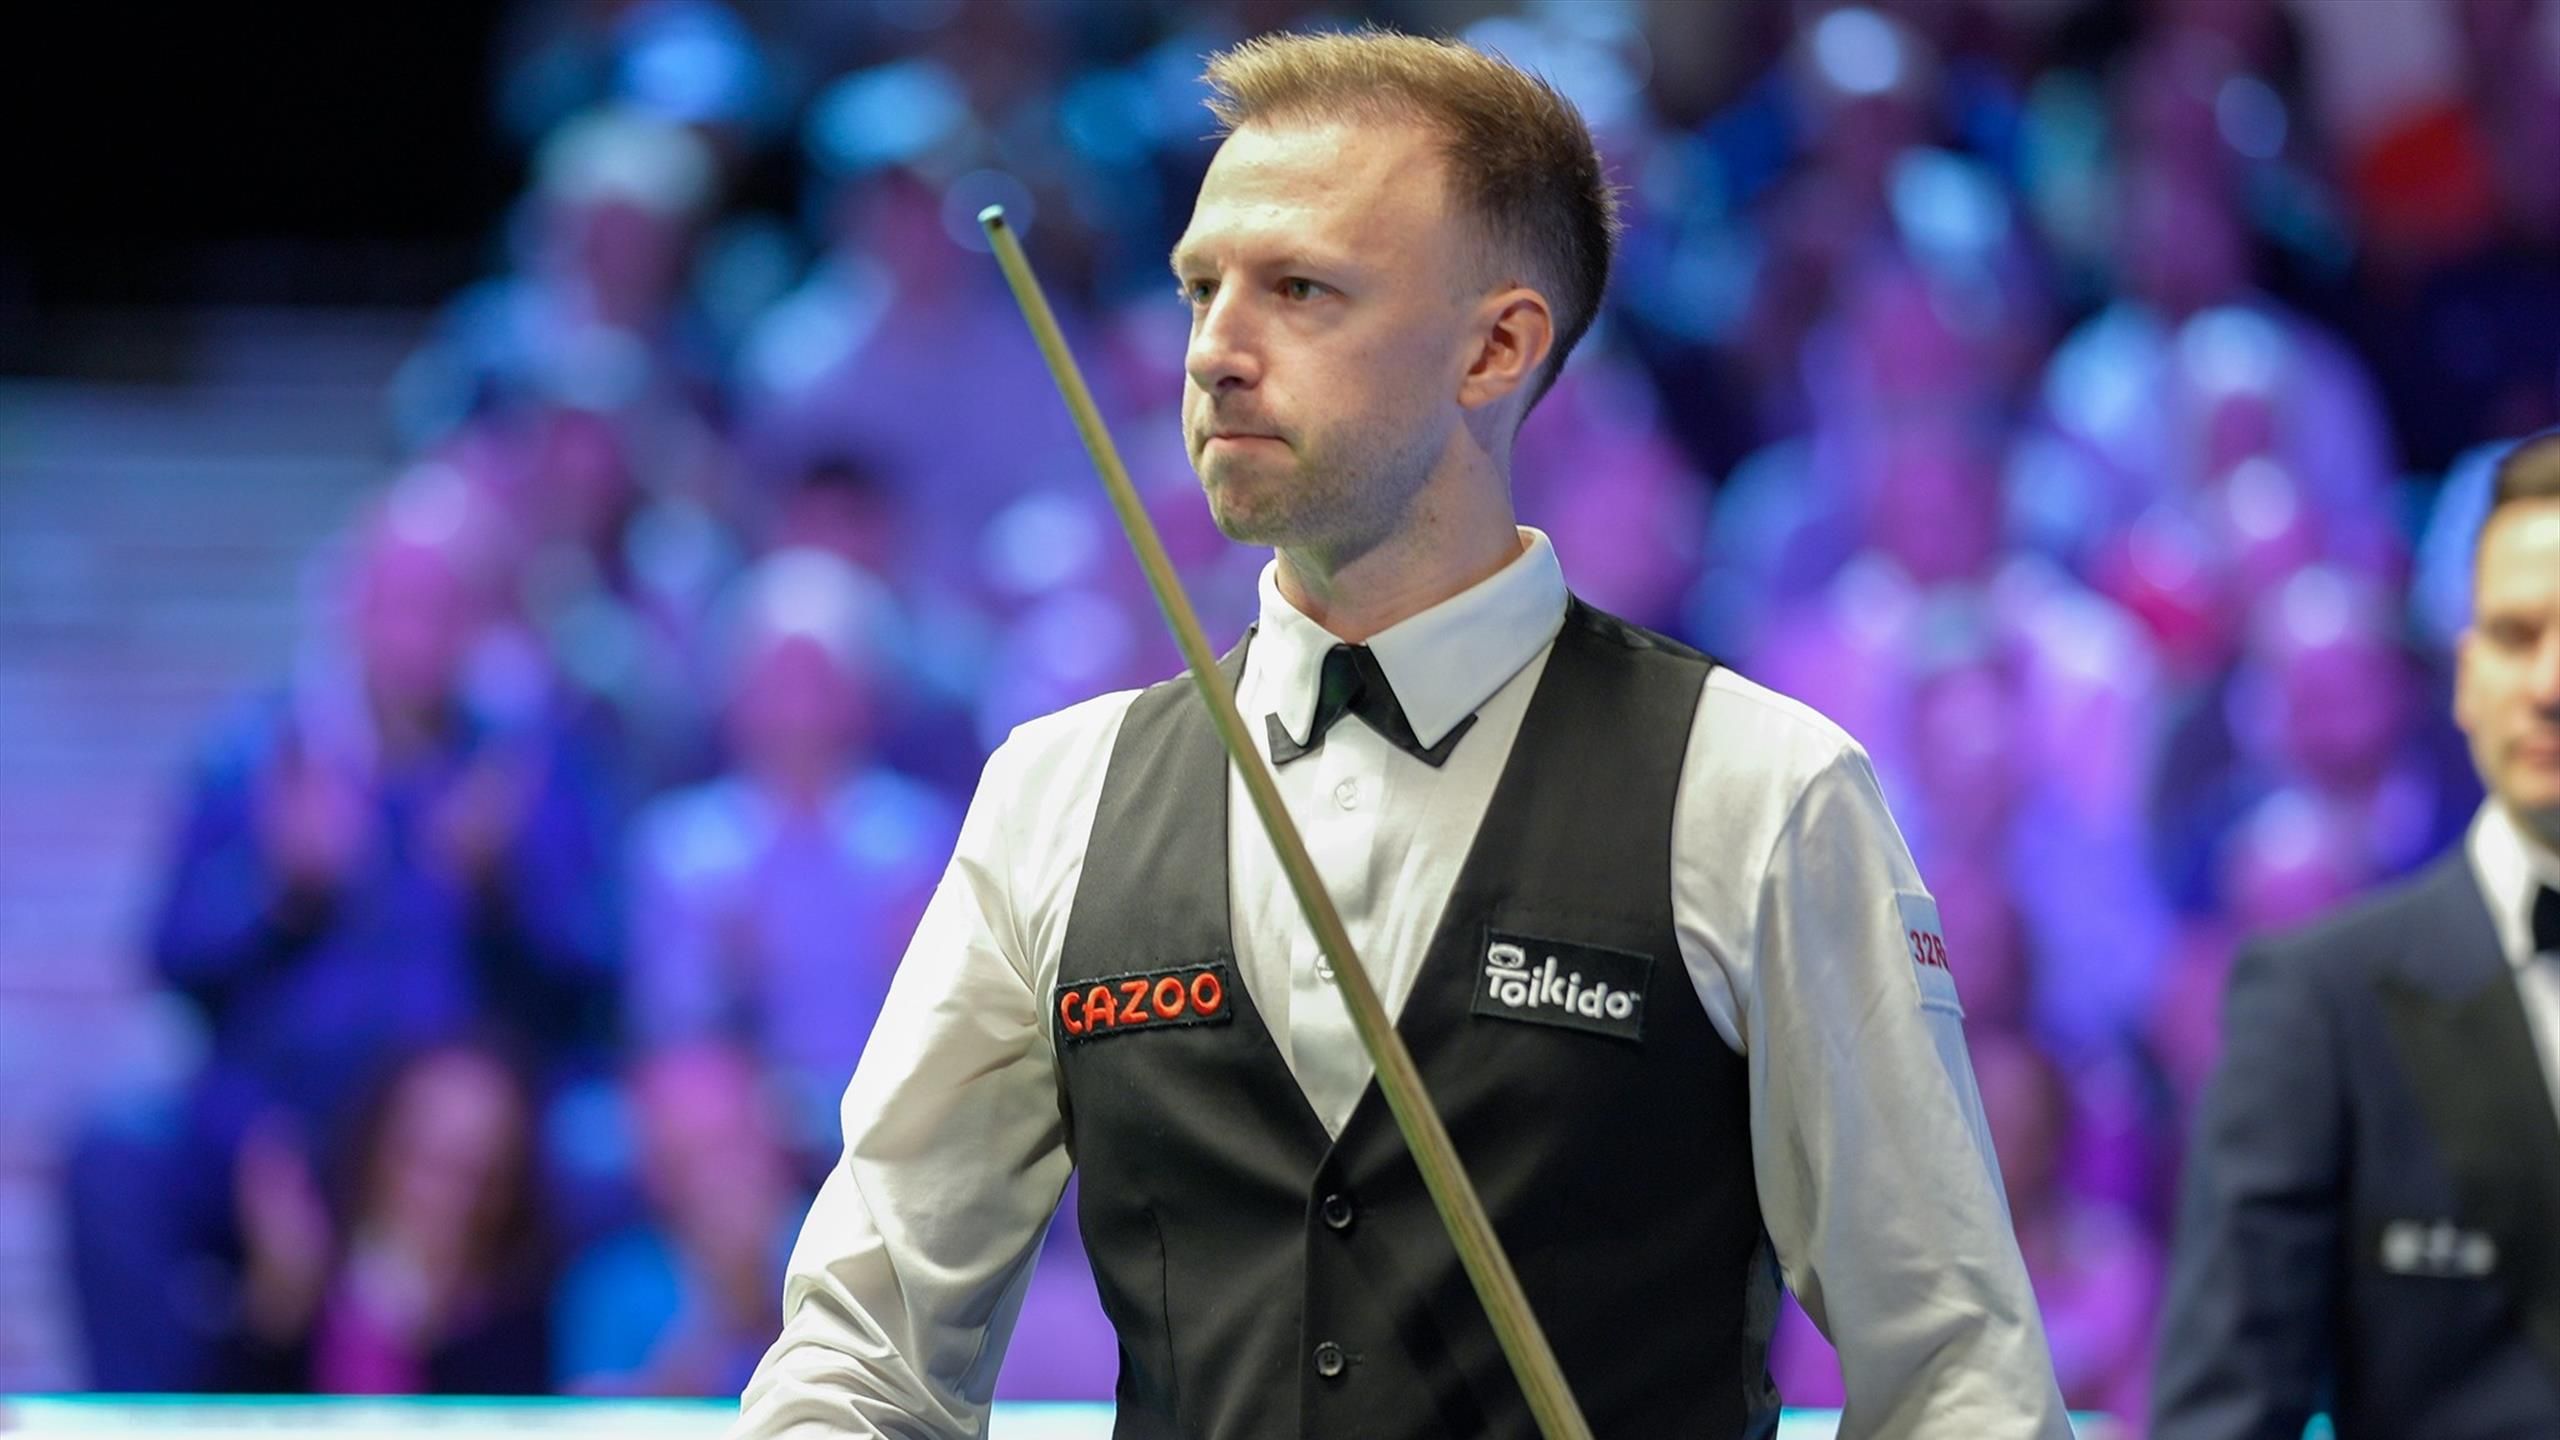 A new snooker tournament begins, and Judd Trump attempts a hat-trick